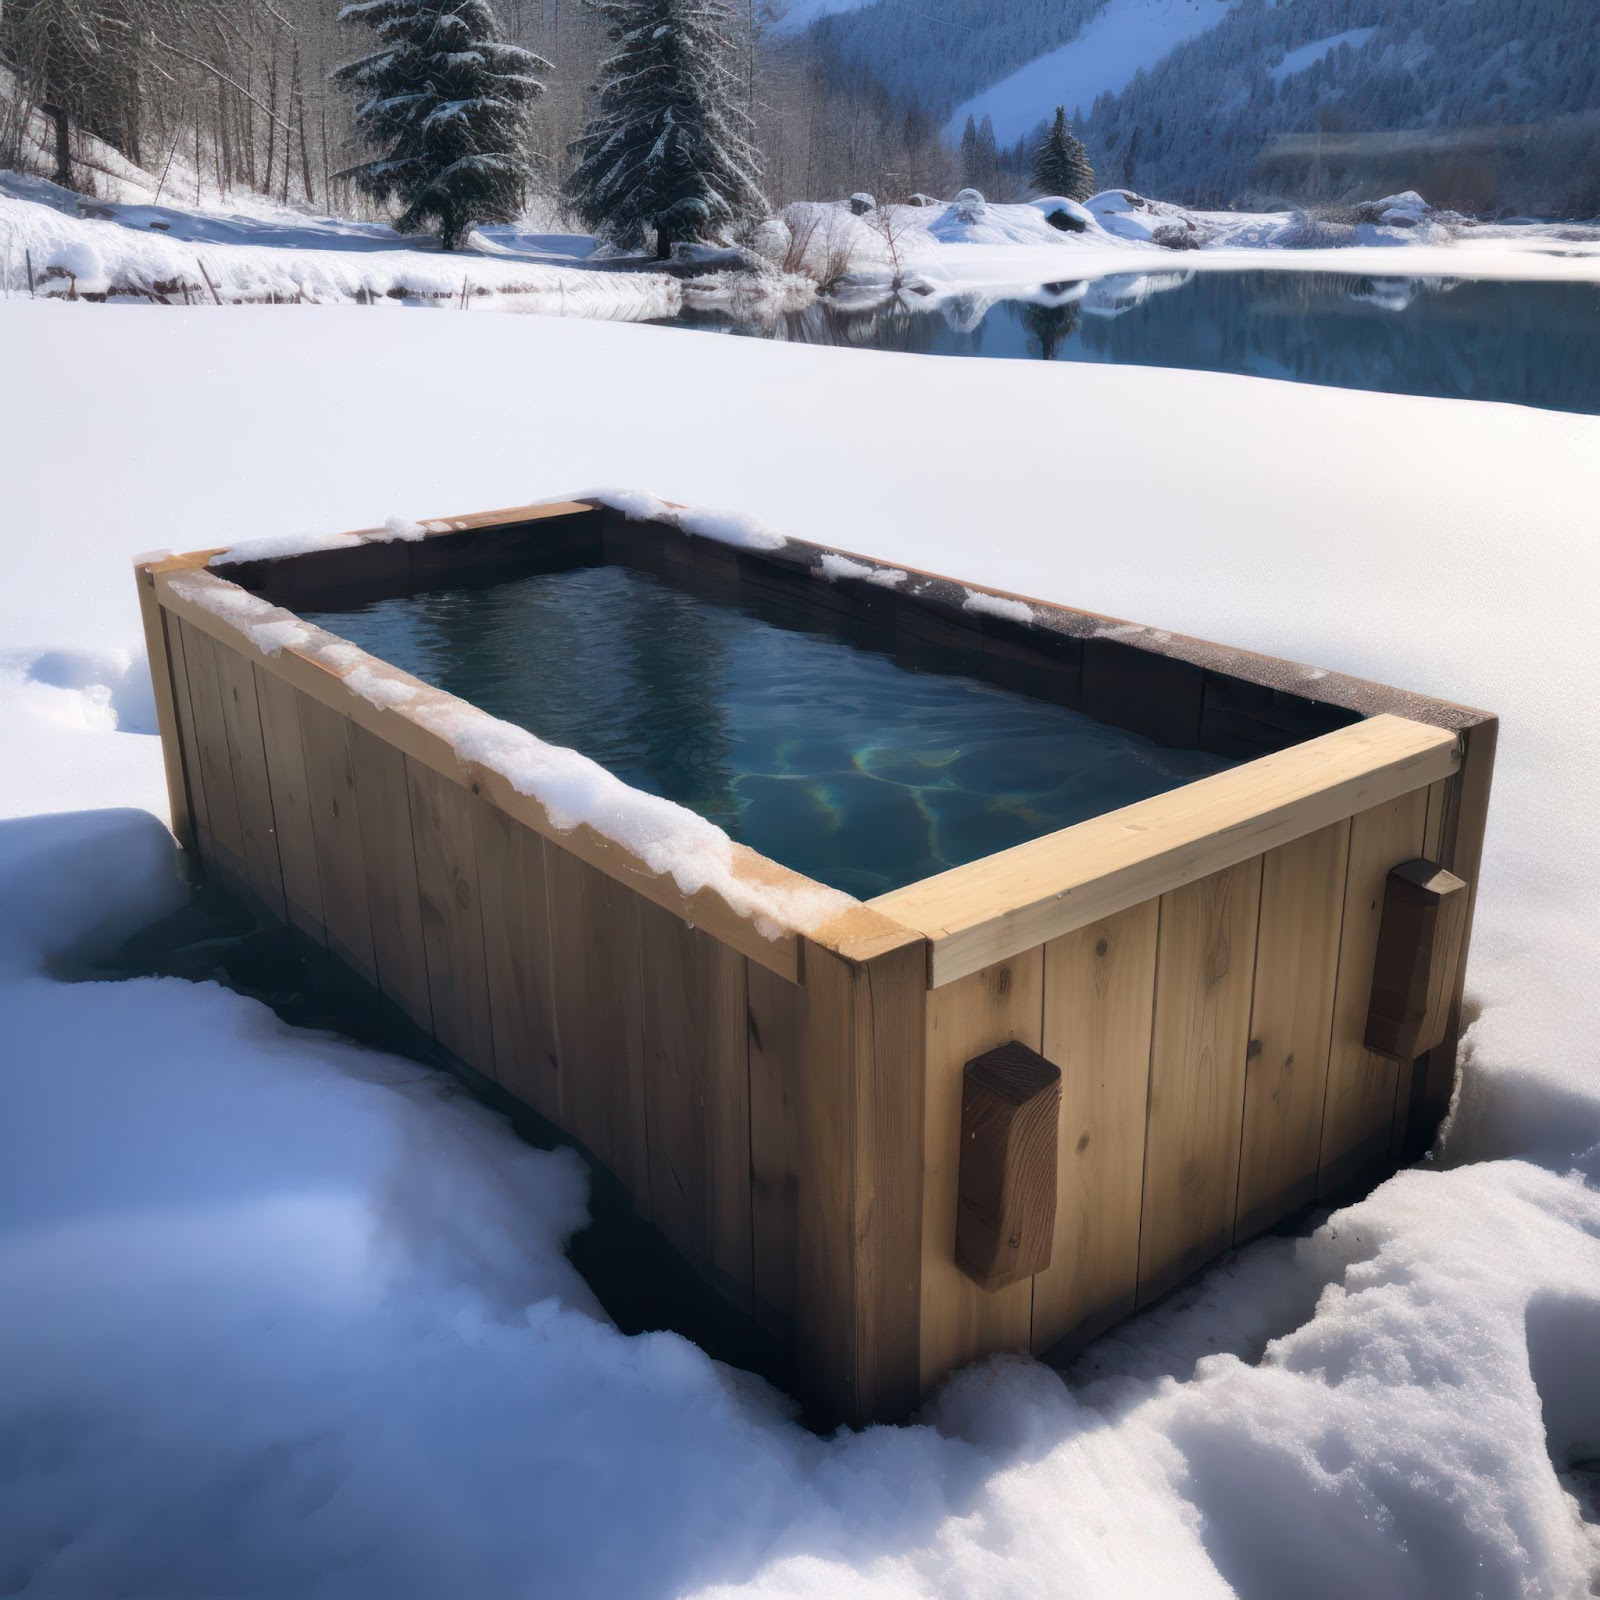 Outdoor cold plunge tub in a snowy, mountainous area